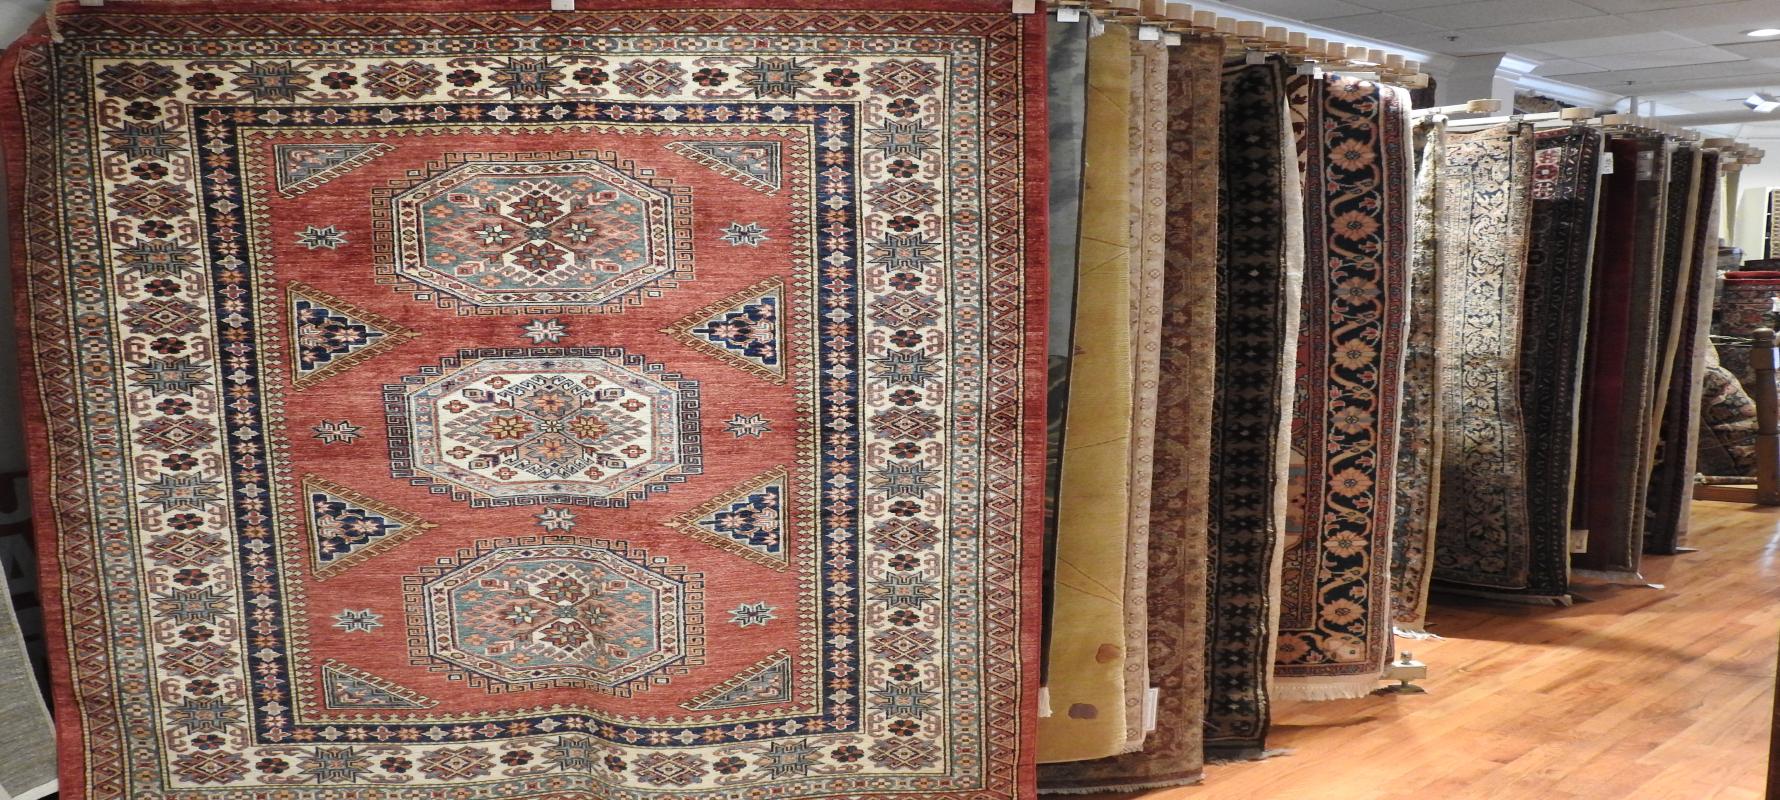 Shiraz Oriental Rug Gallery Ecommerce, Rugs Of The World Tampa Bay Floor